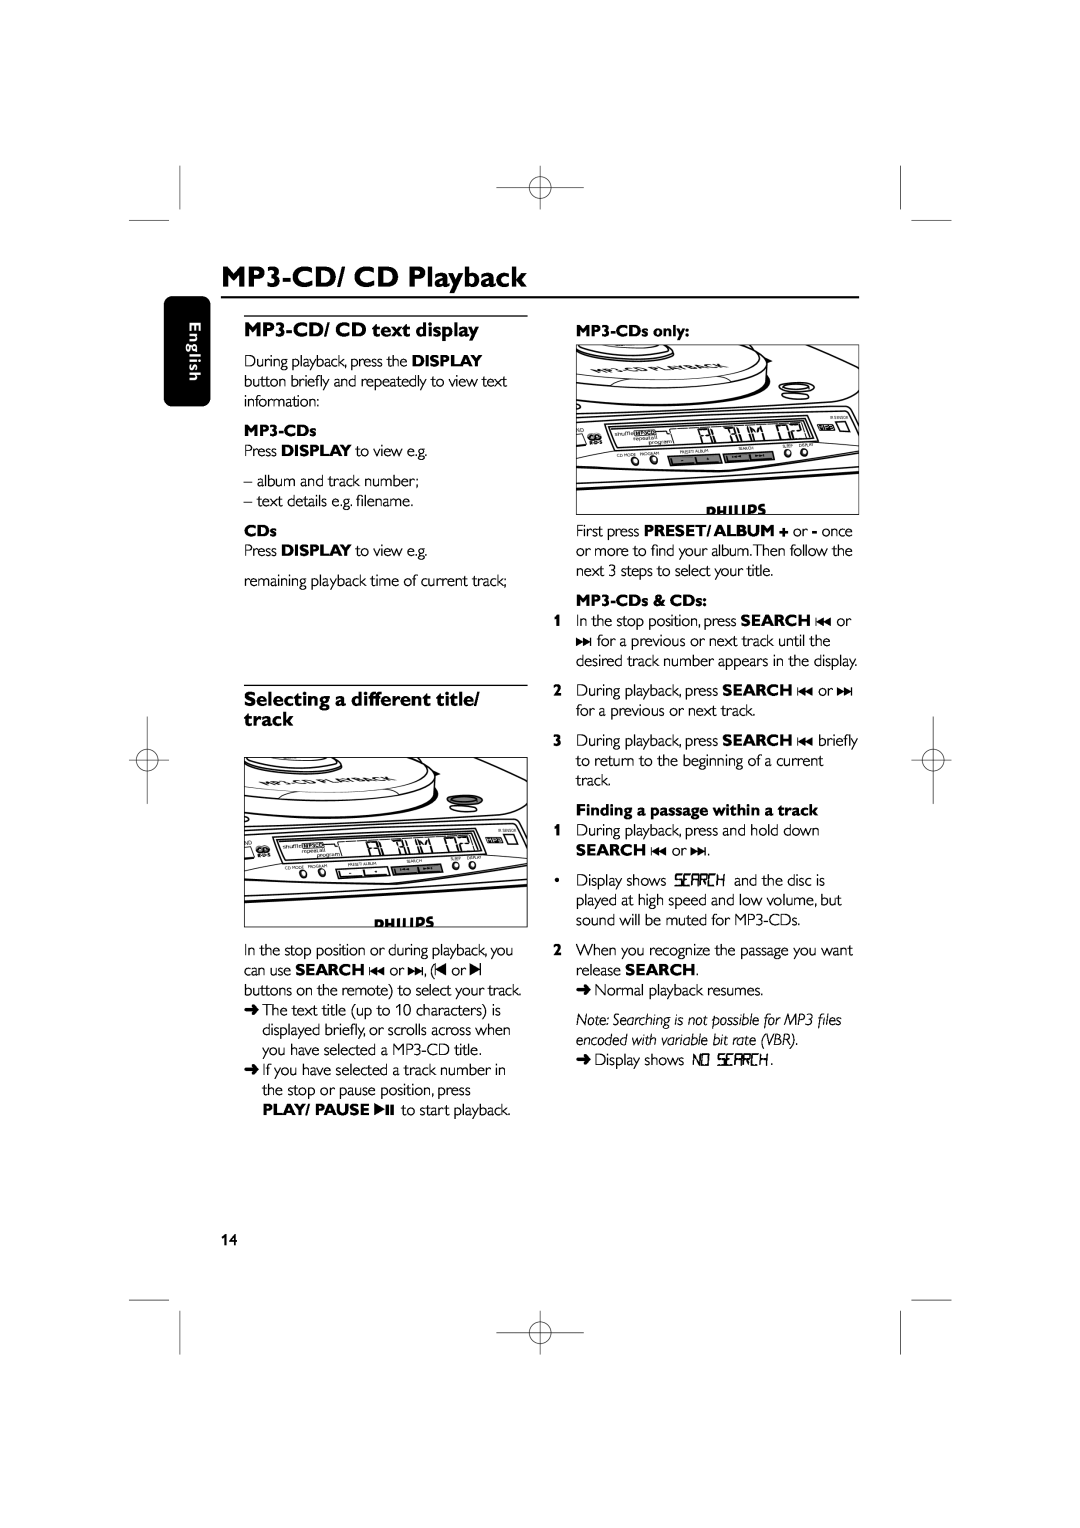 Philips AZ4000 manual MP3-CD/ CD text display, Selecting a different title/ track, MP3-CDs only, MP3-CDs & CDs, English 